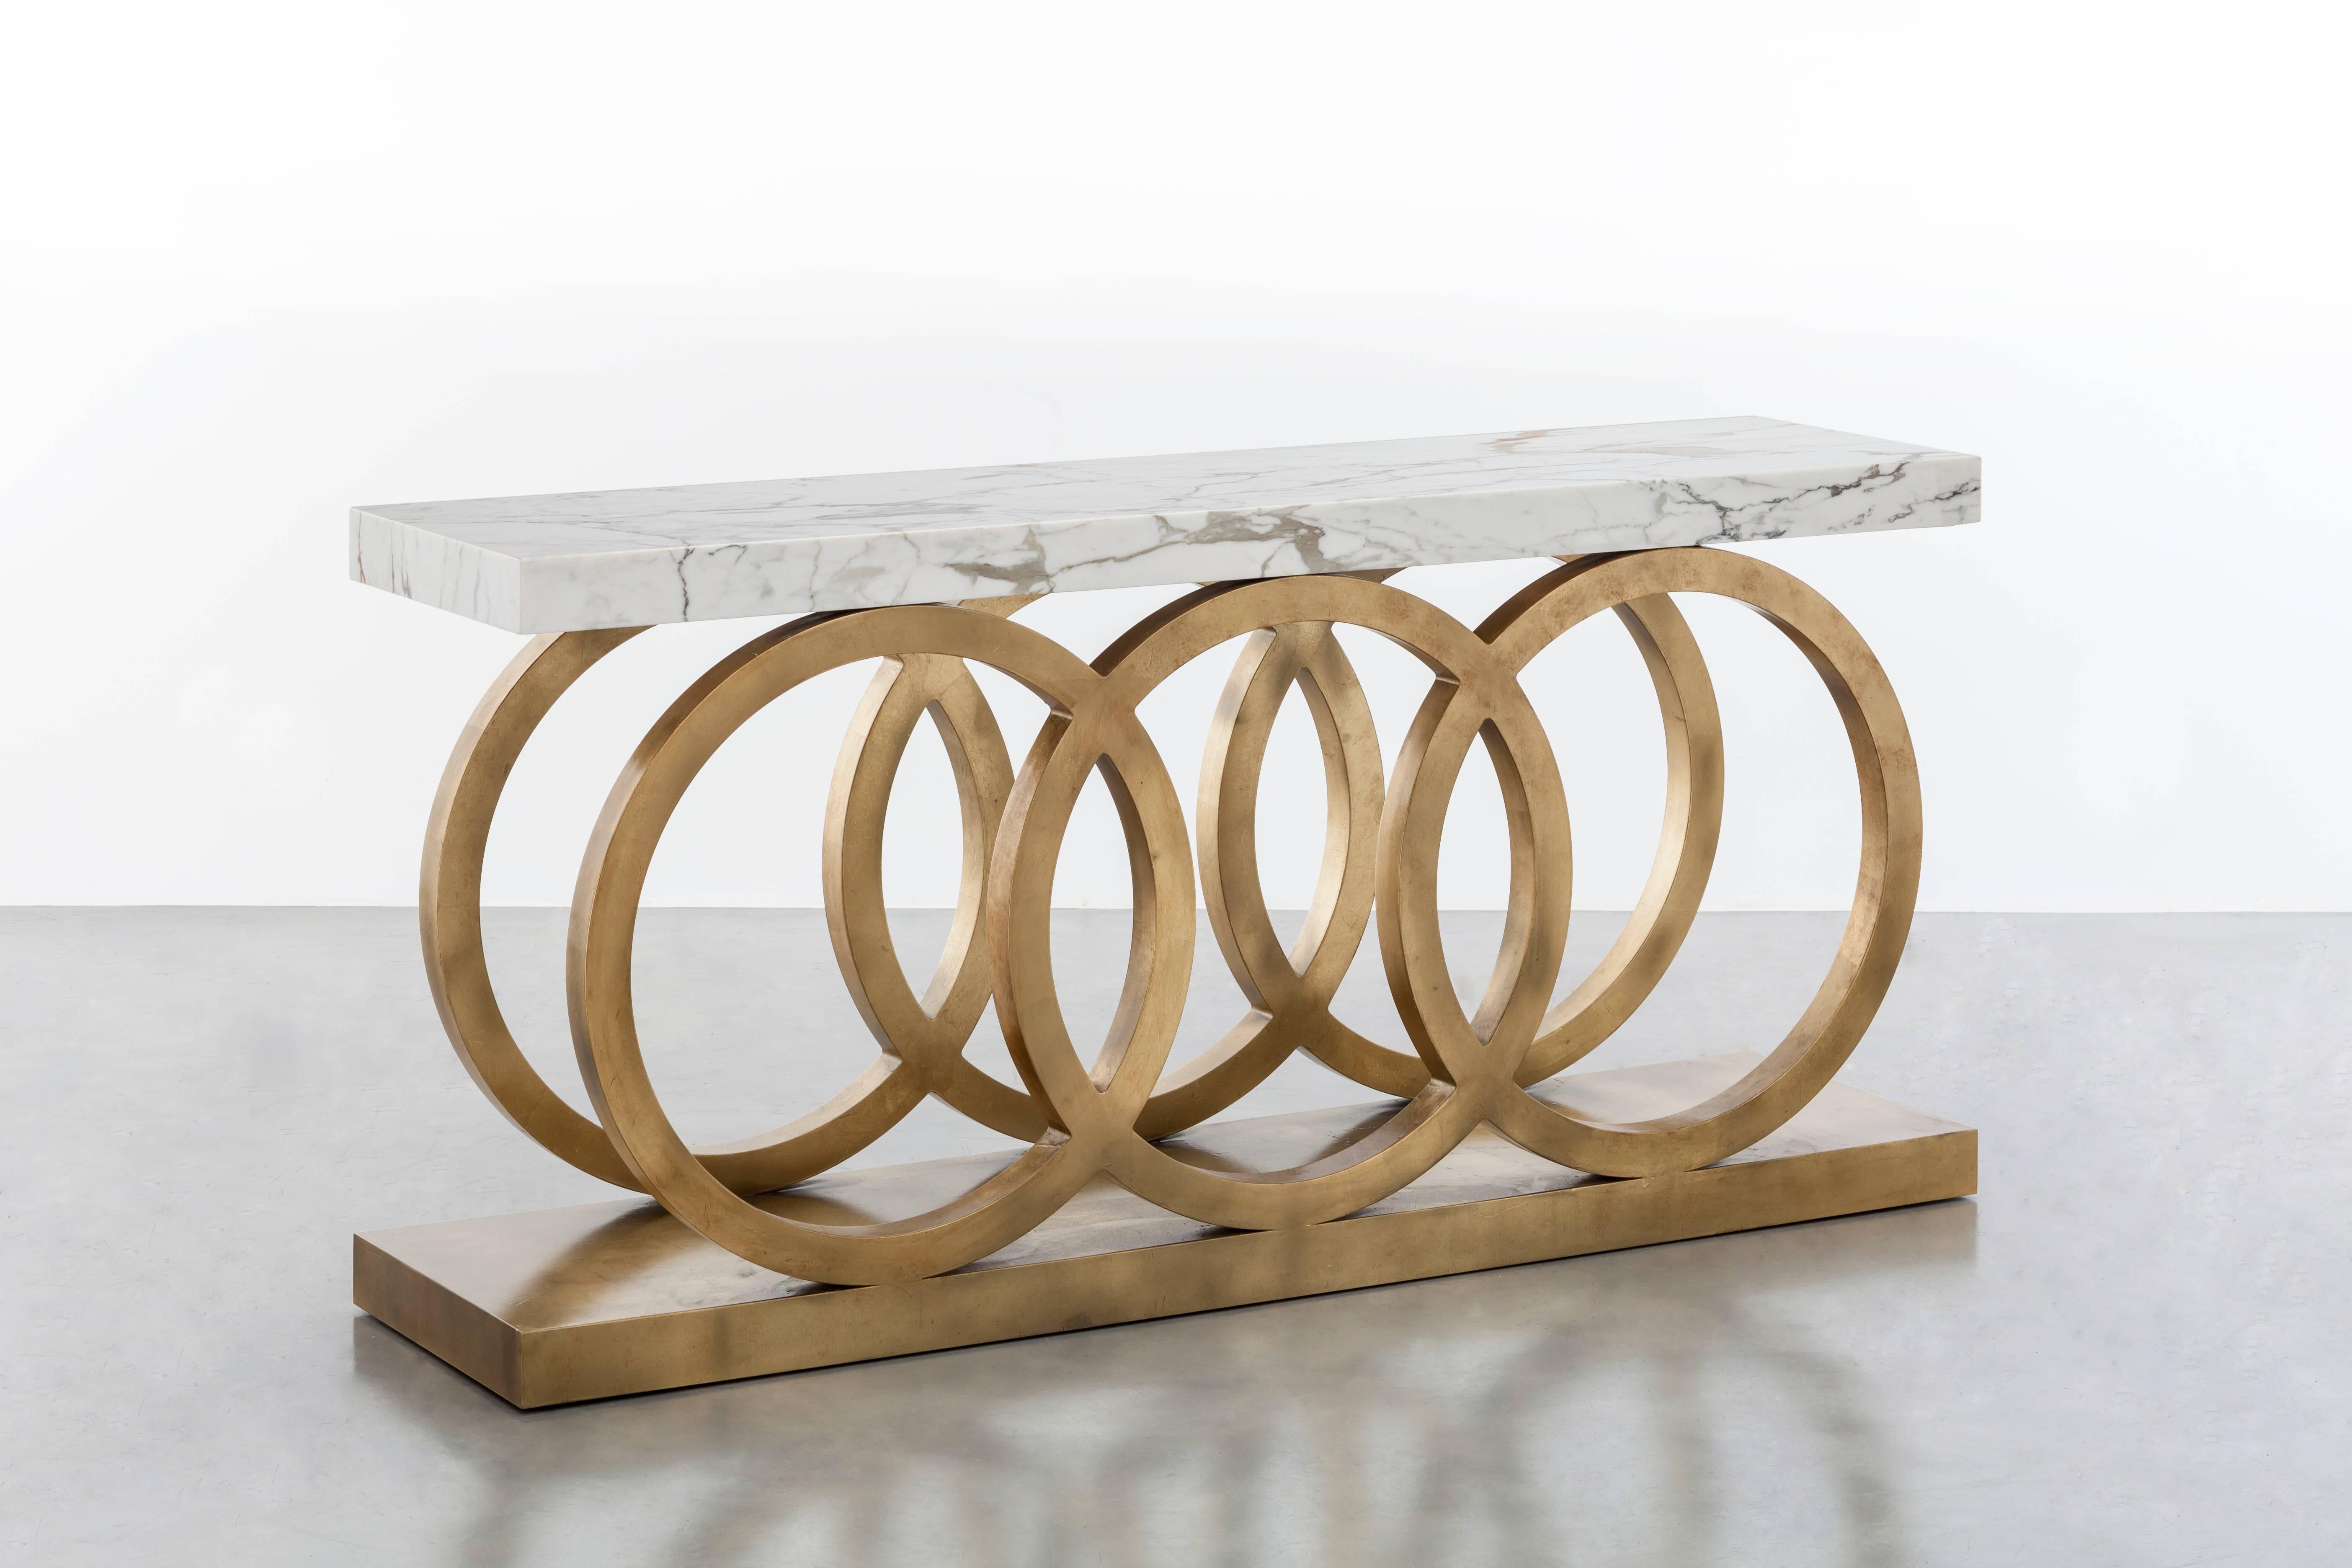 OSLO GRANDE CONSOLE - Modern Circular Design Gold Leaf and Carrara Marble Table

The Oslo Grande console table is a luxurious and contemporary piece of furniture that is perfect for upscale interiors. It features a stunning gold-leafed frame and a